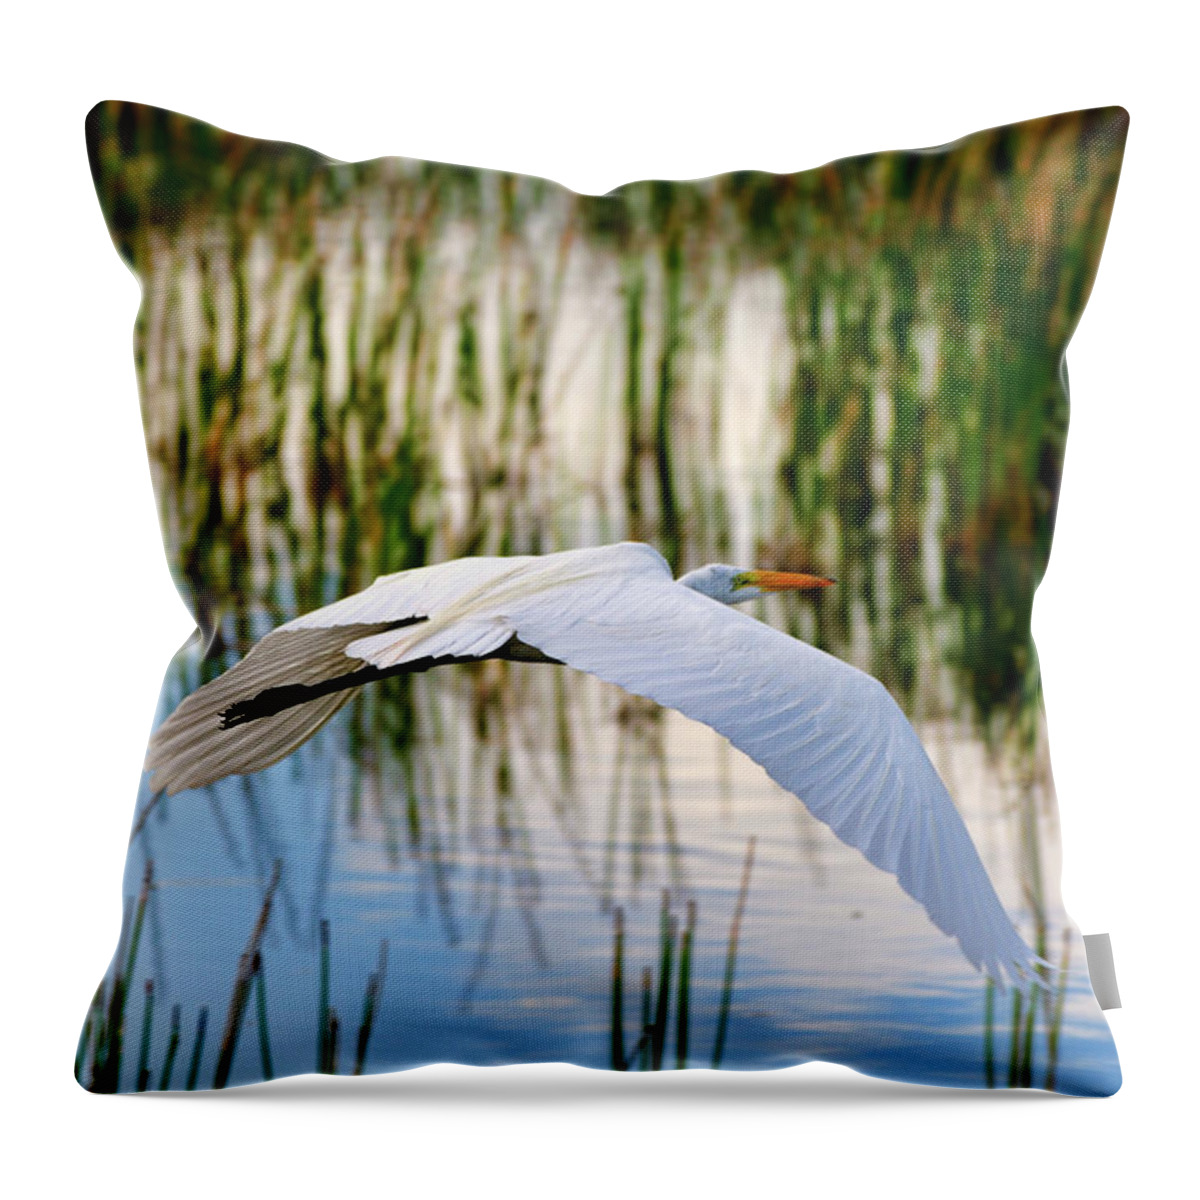 Morning Throw Pillow featuring the photograph Morning Flight by Bill Dodsworth